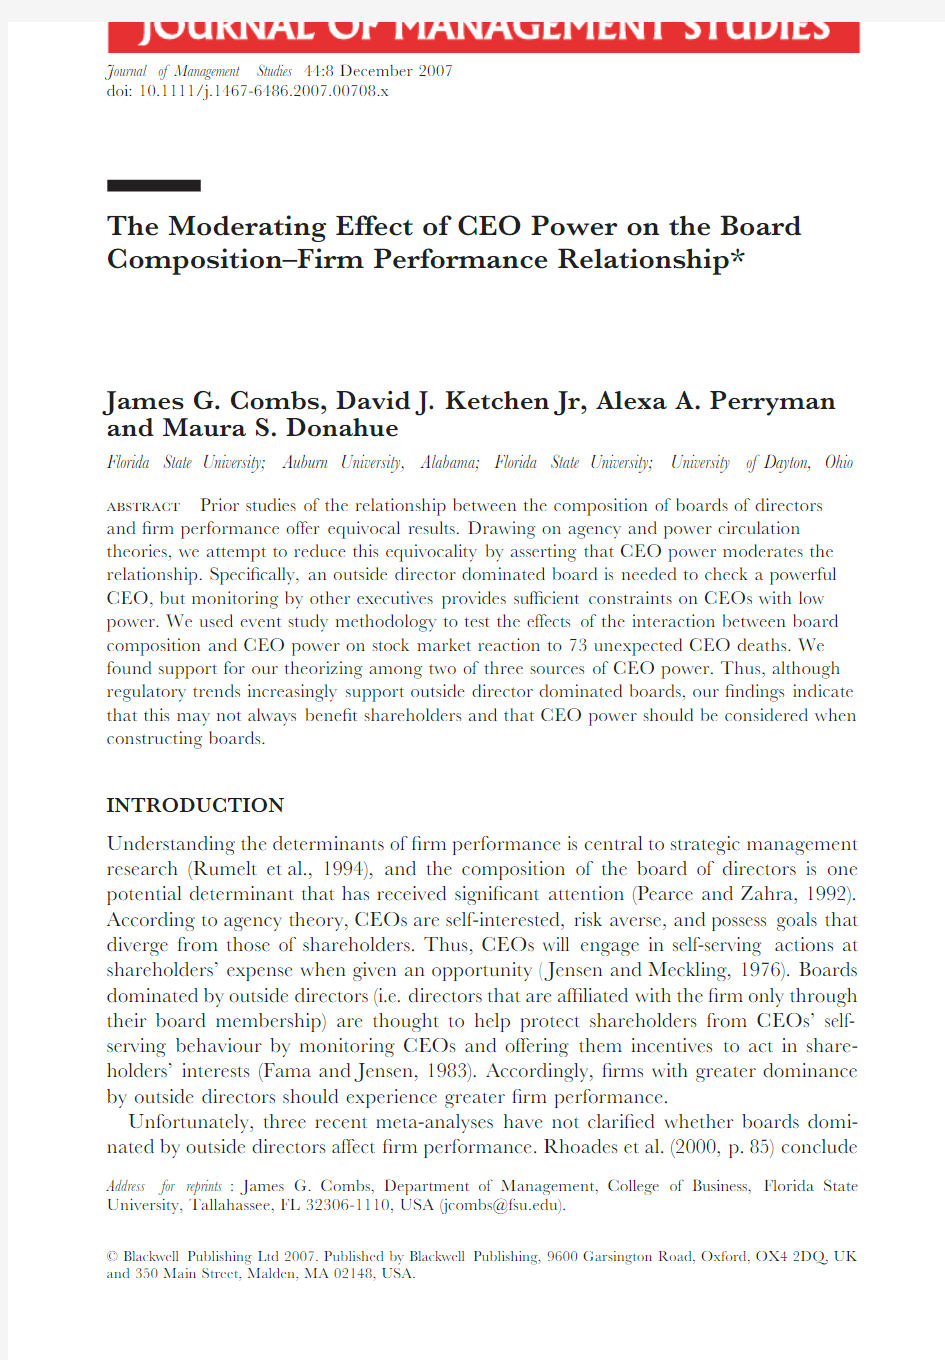 The Moderating Effect of CEO Power on the Board Composition–Firm Performance Relationship